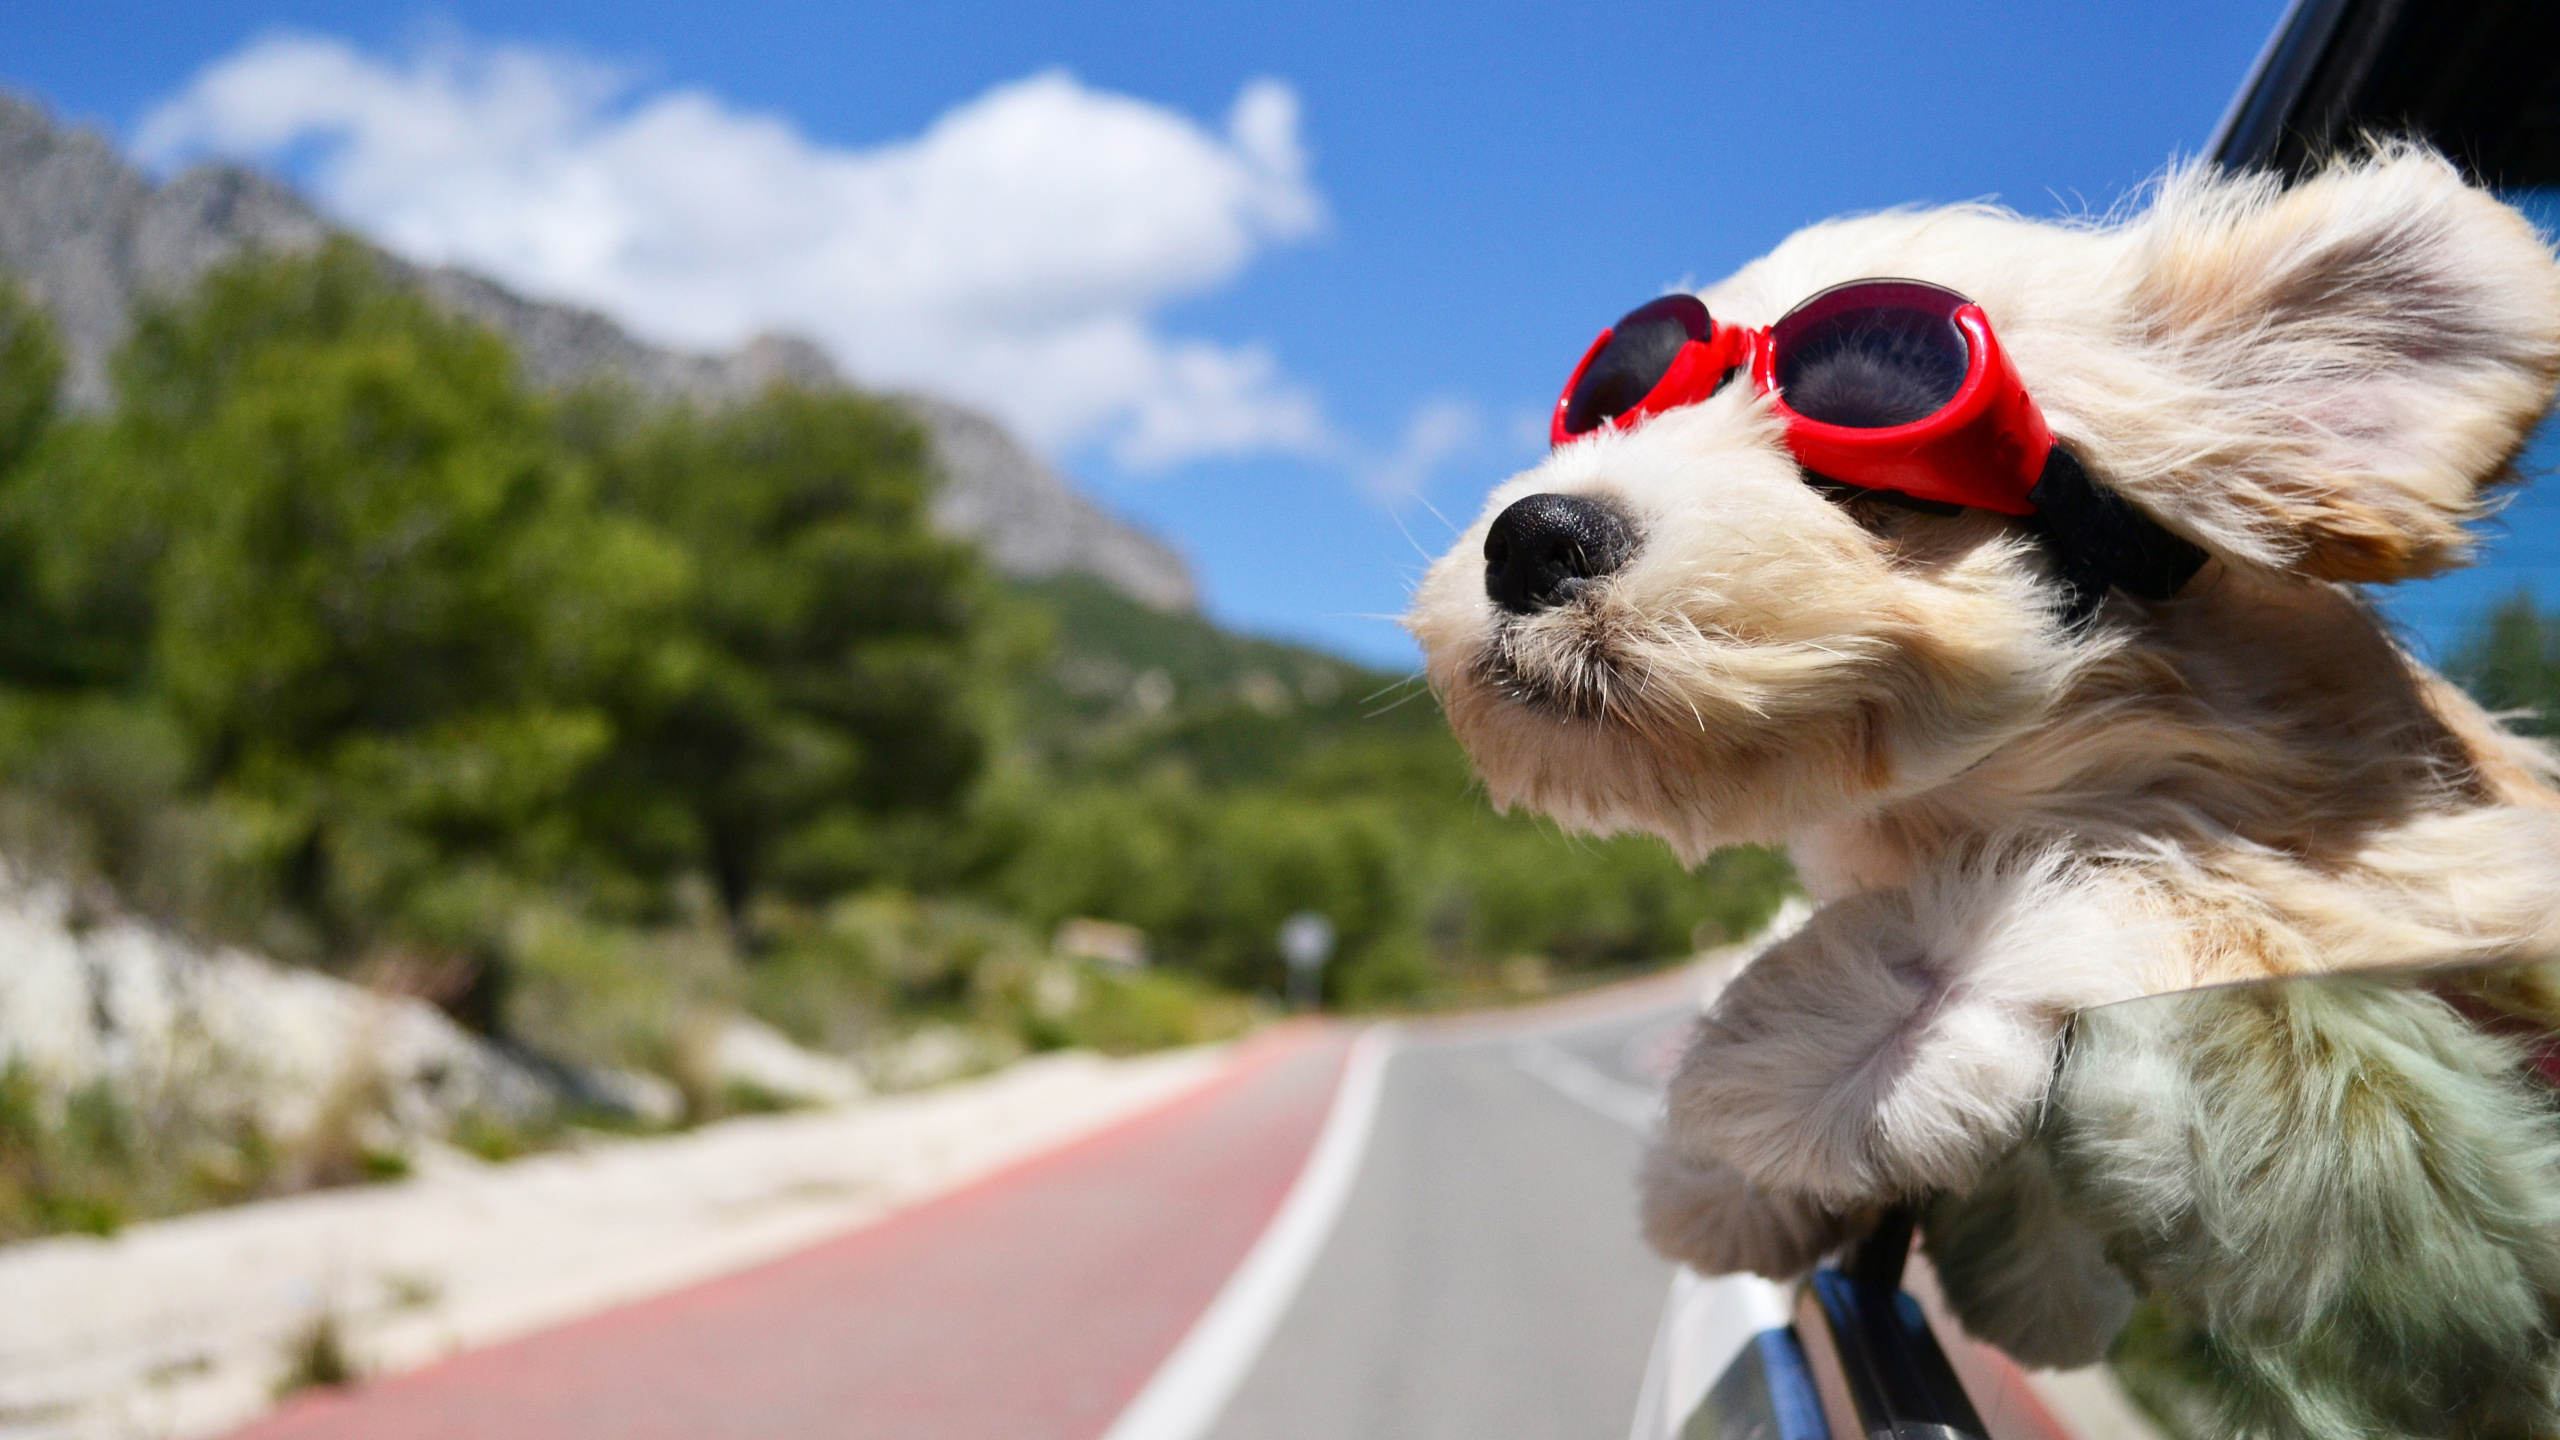 White Long Coated Small Dog Wearing Sunglasses. Wallpaper in 2560x1440 Resolution